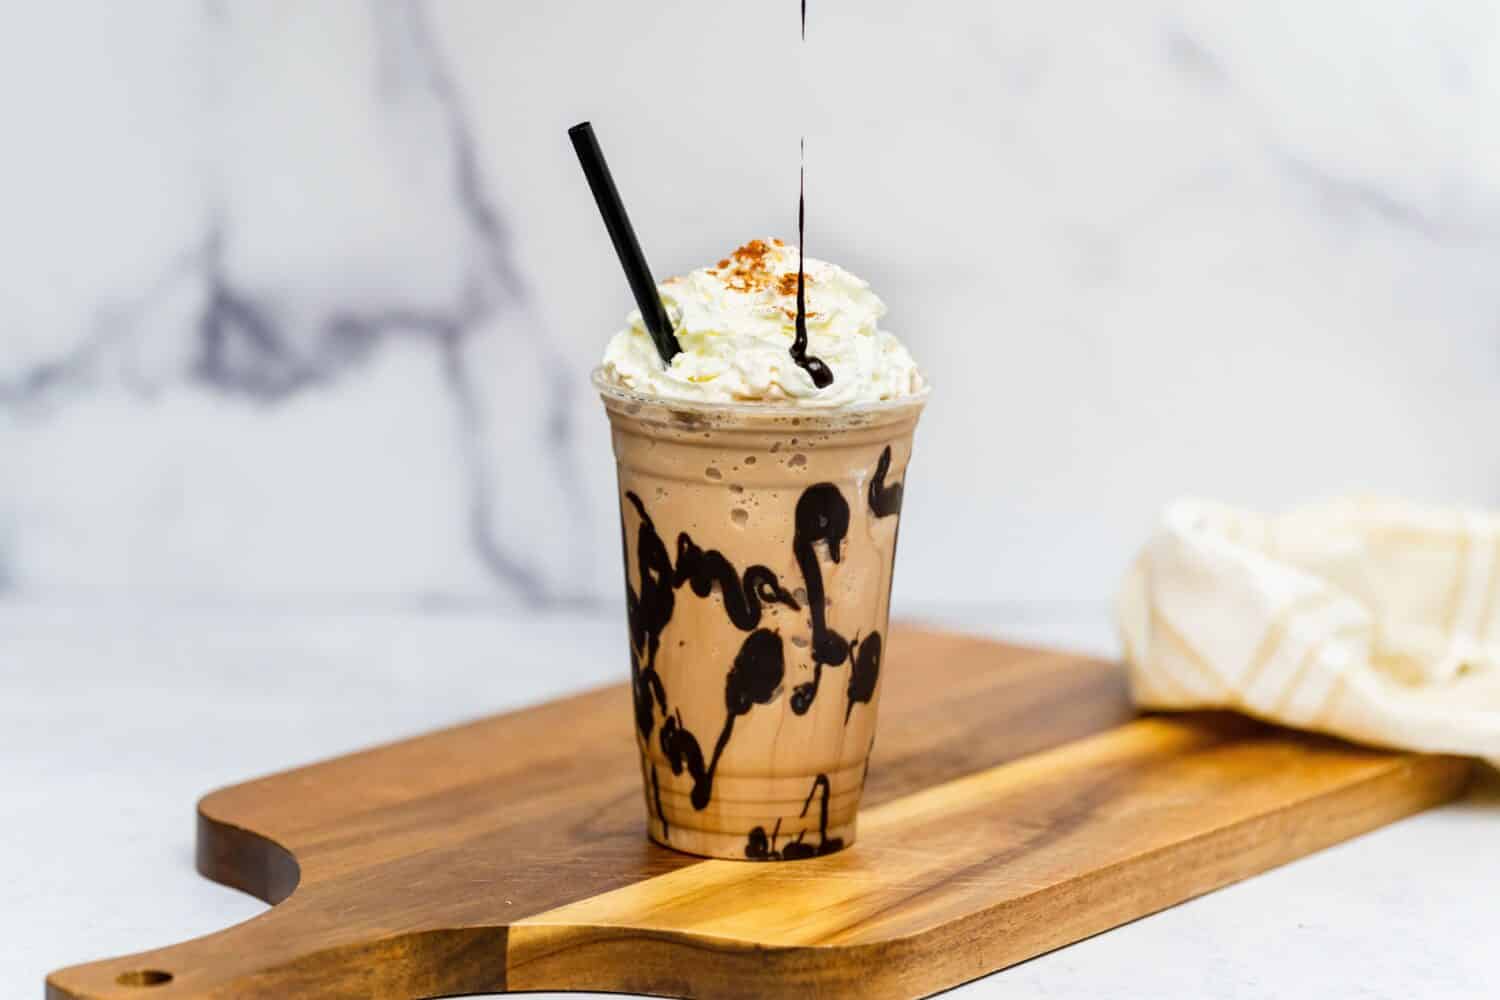 A tasty fresh Frappuccino with cream served on the wooden board